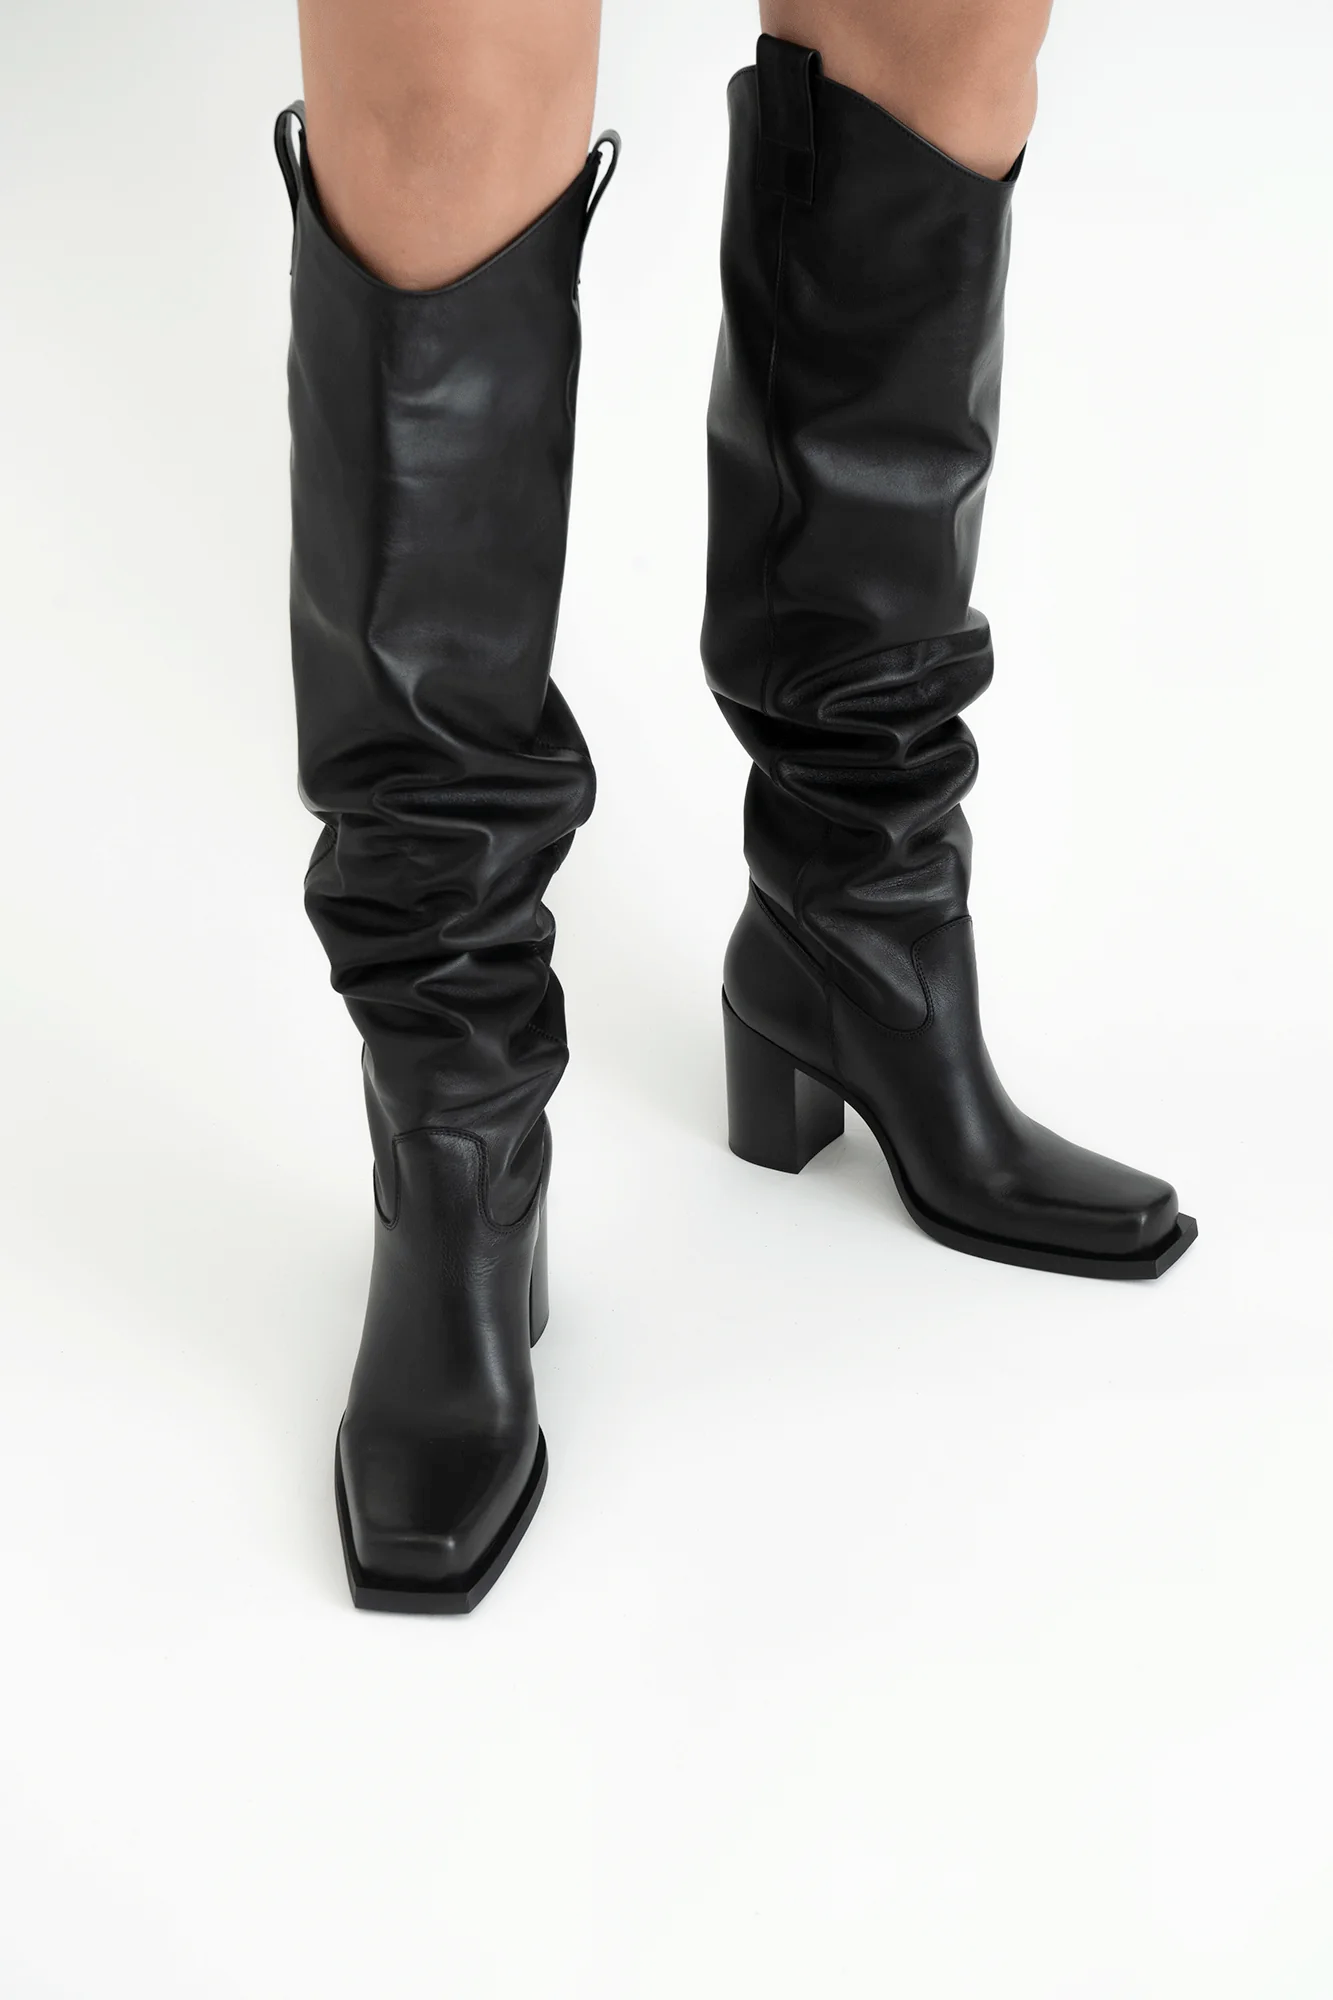 Milly boots, black leather